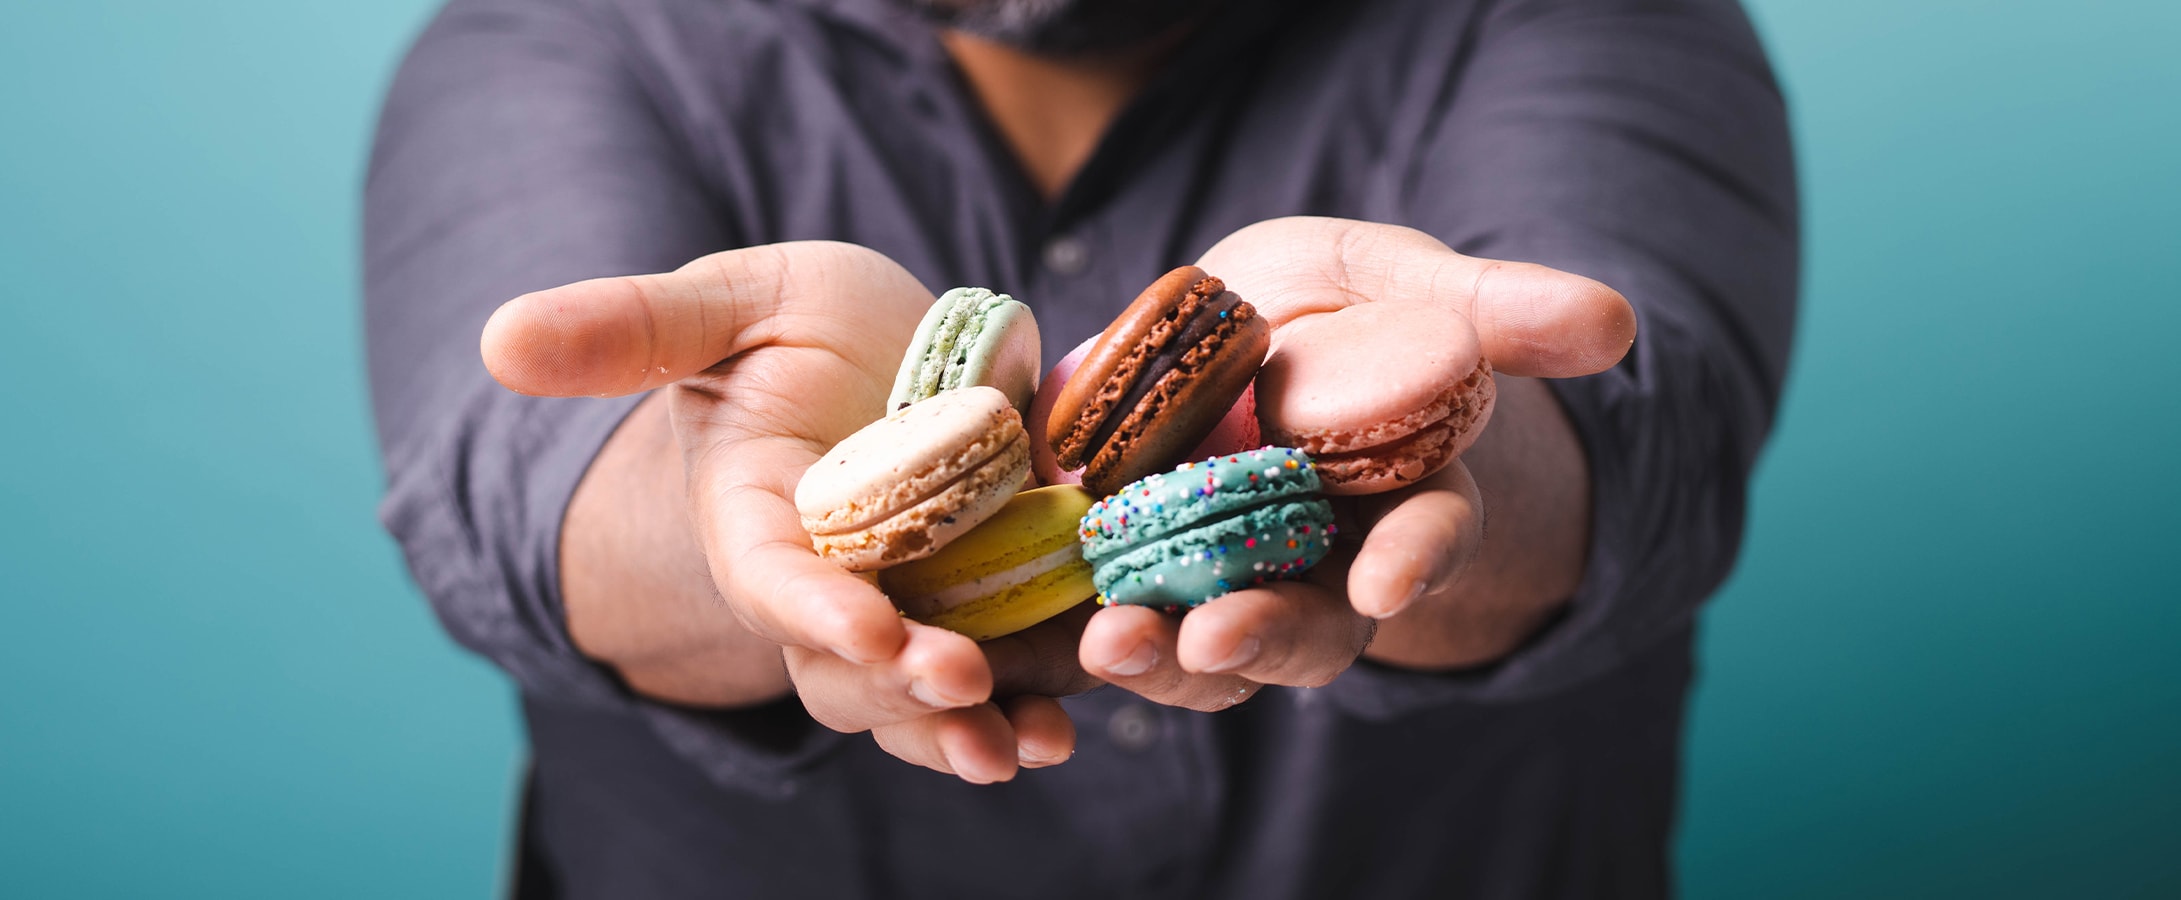 A smiling man is holding some assorted French macarons in his hands.